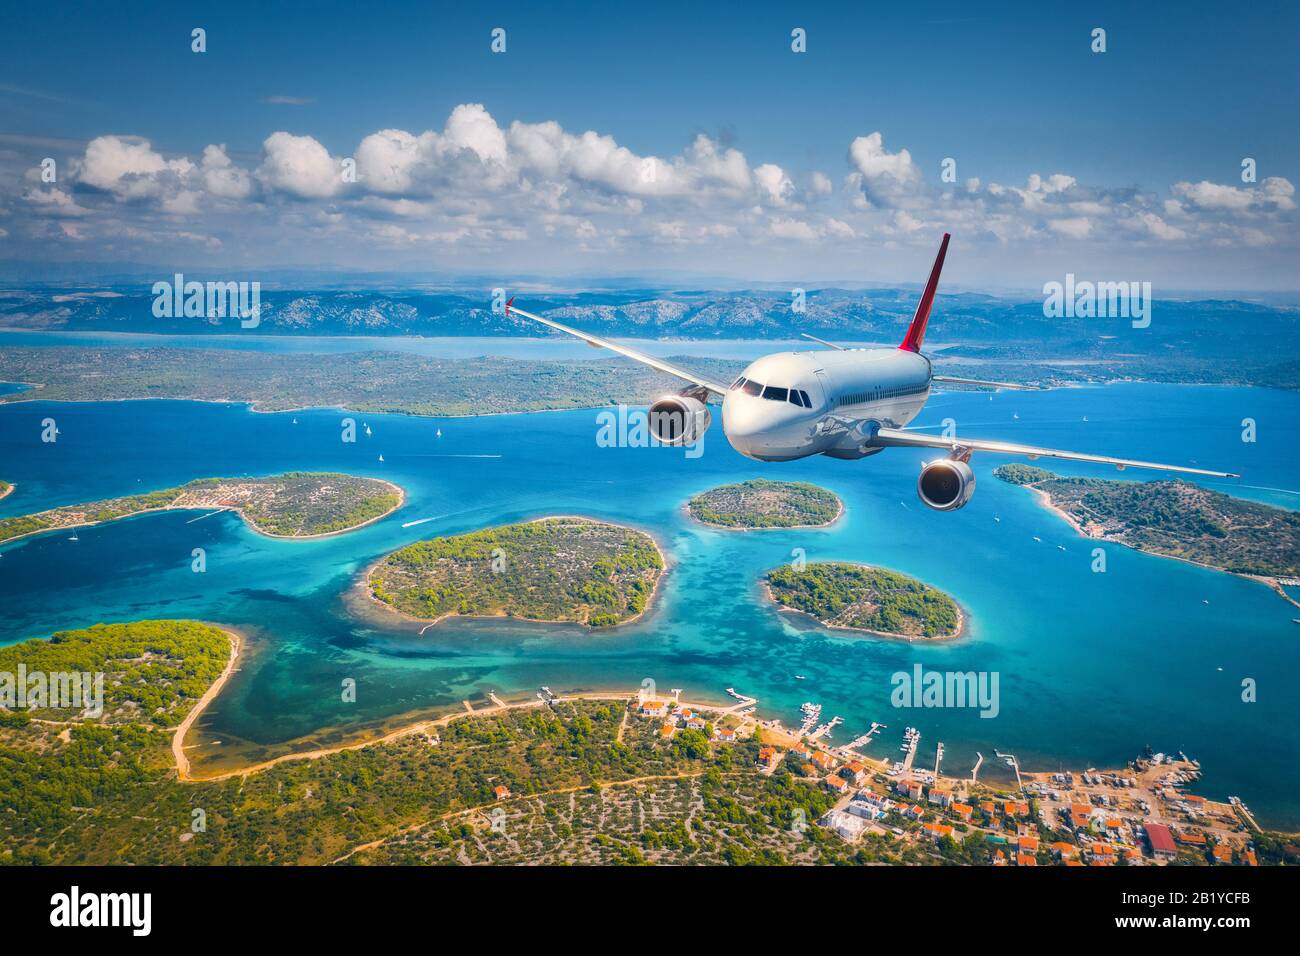 Airplane is flying over small islands and sea at sunny day Stock Photo